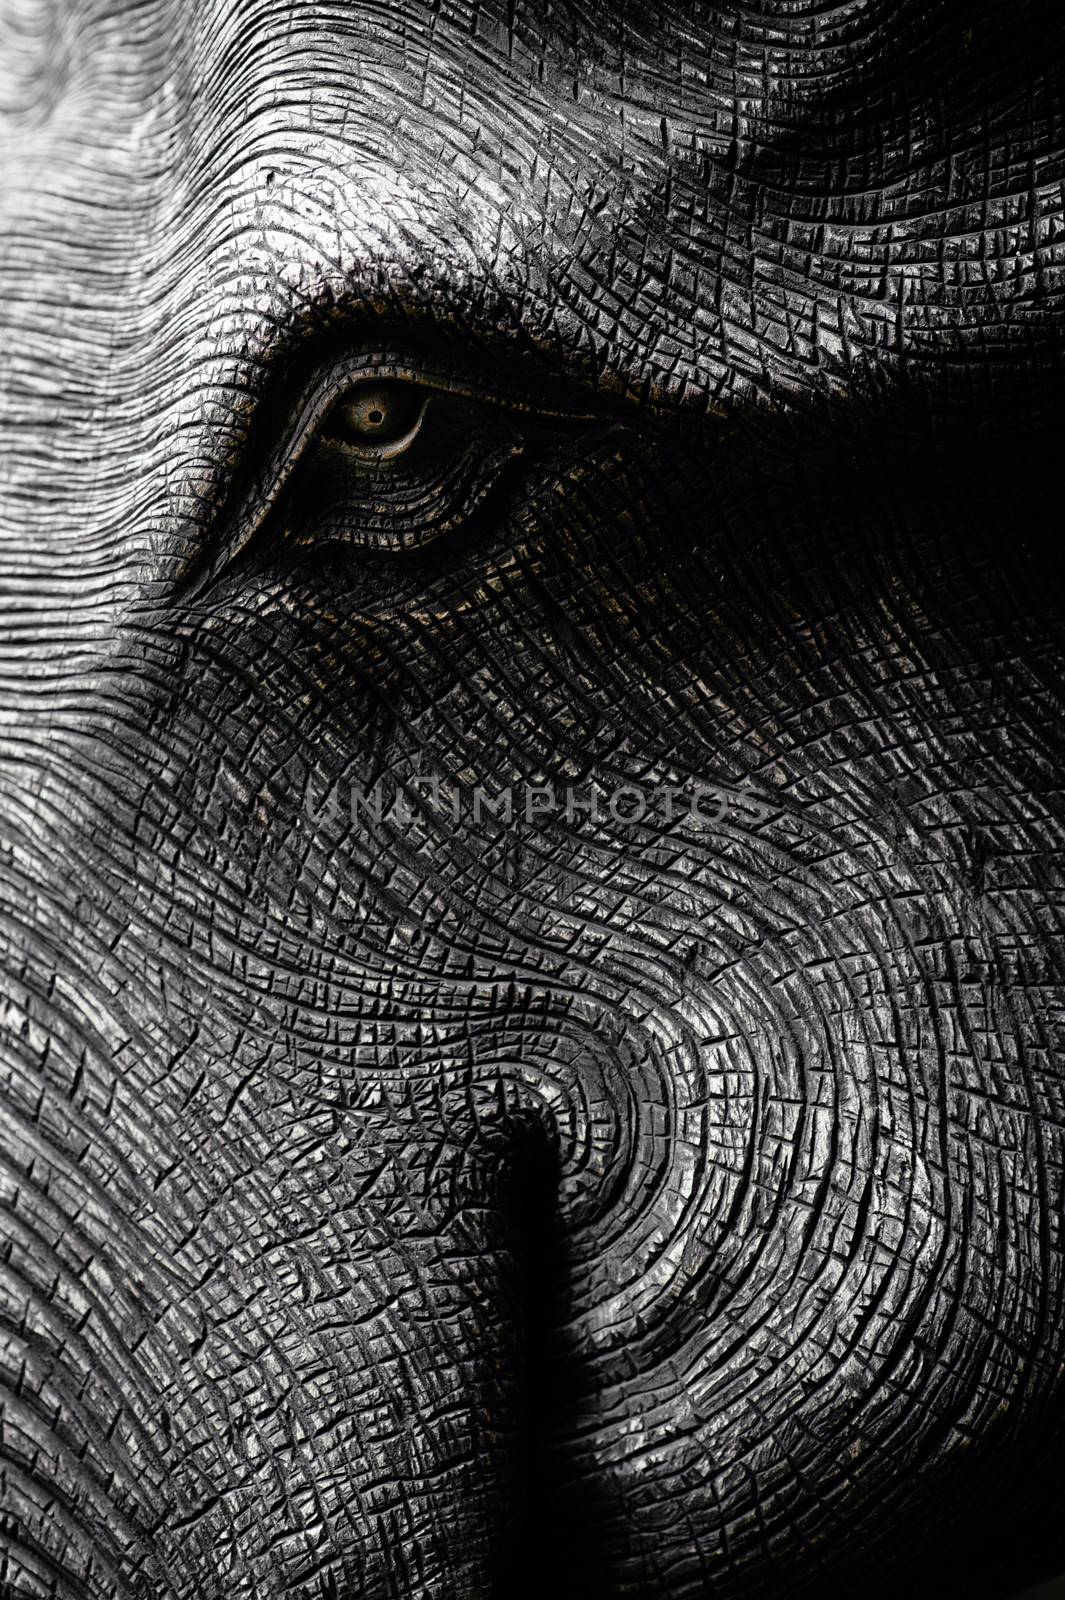 Elephant Head in Black and White by letoakin